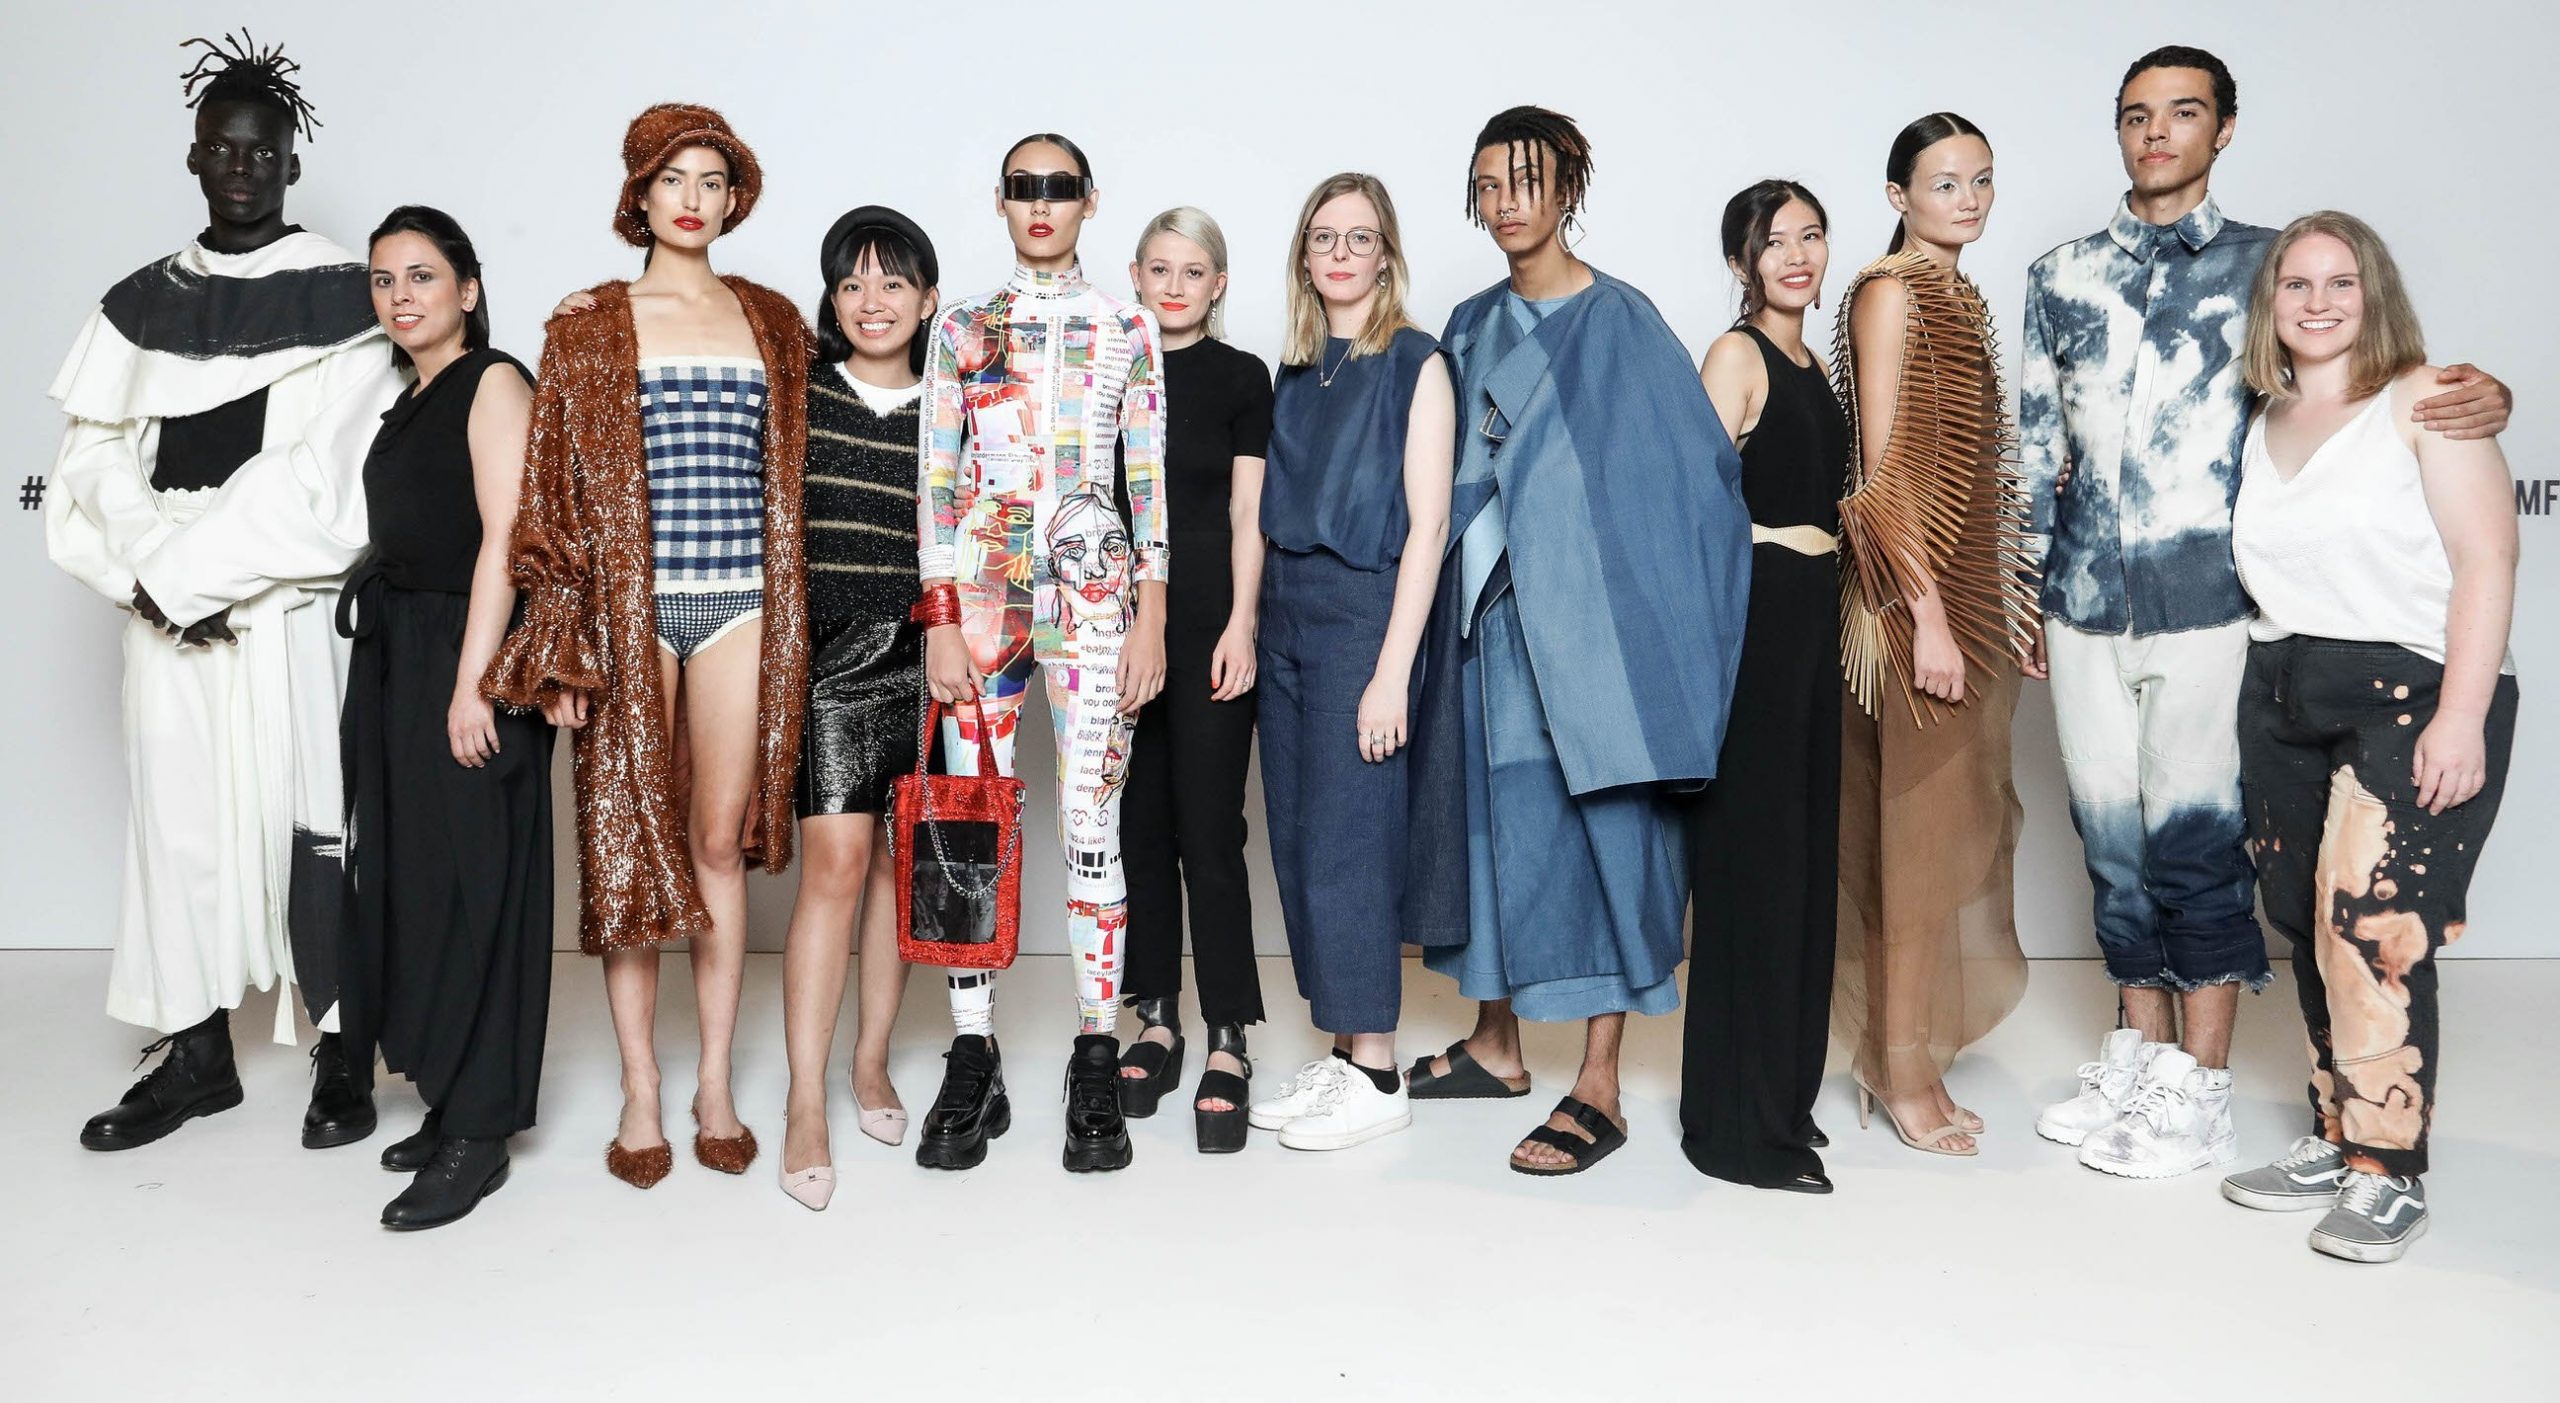 Graduate Designers show off their fashion style with their models, behind the scenes at VAMFF 2019